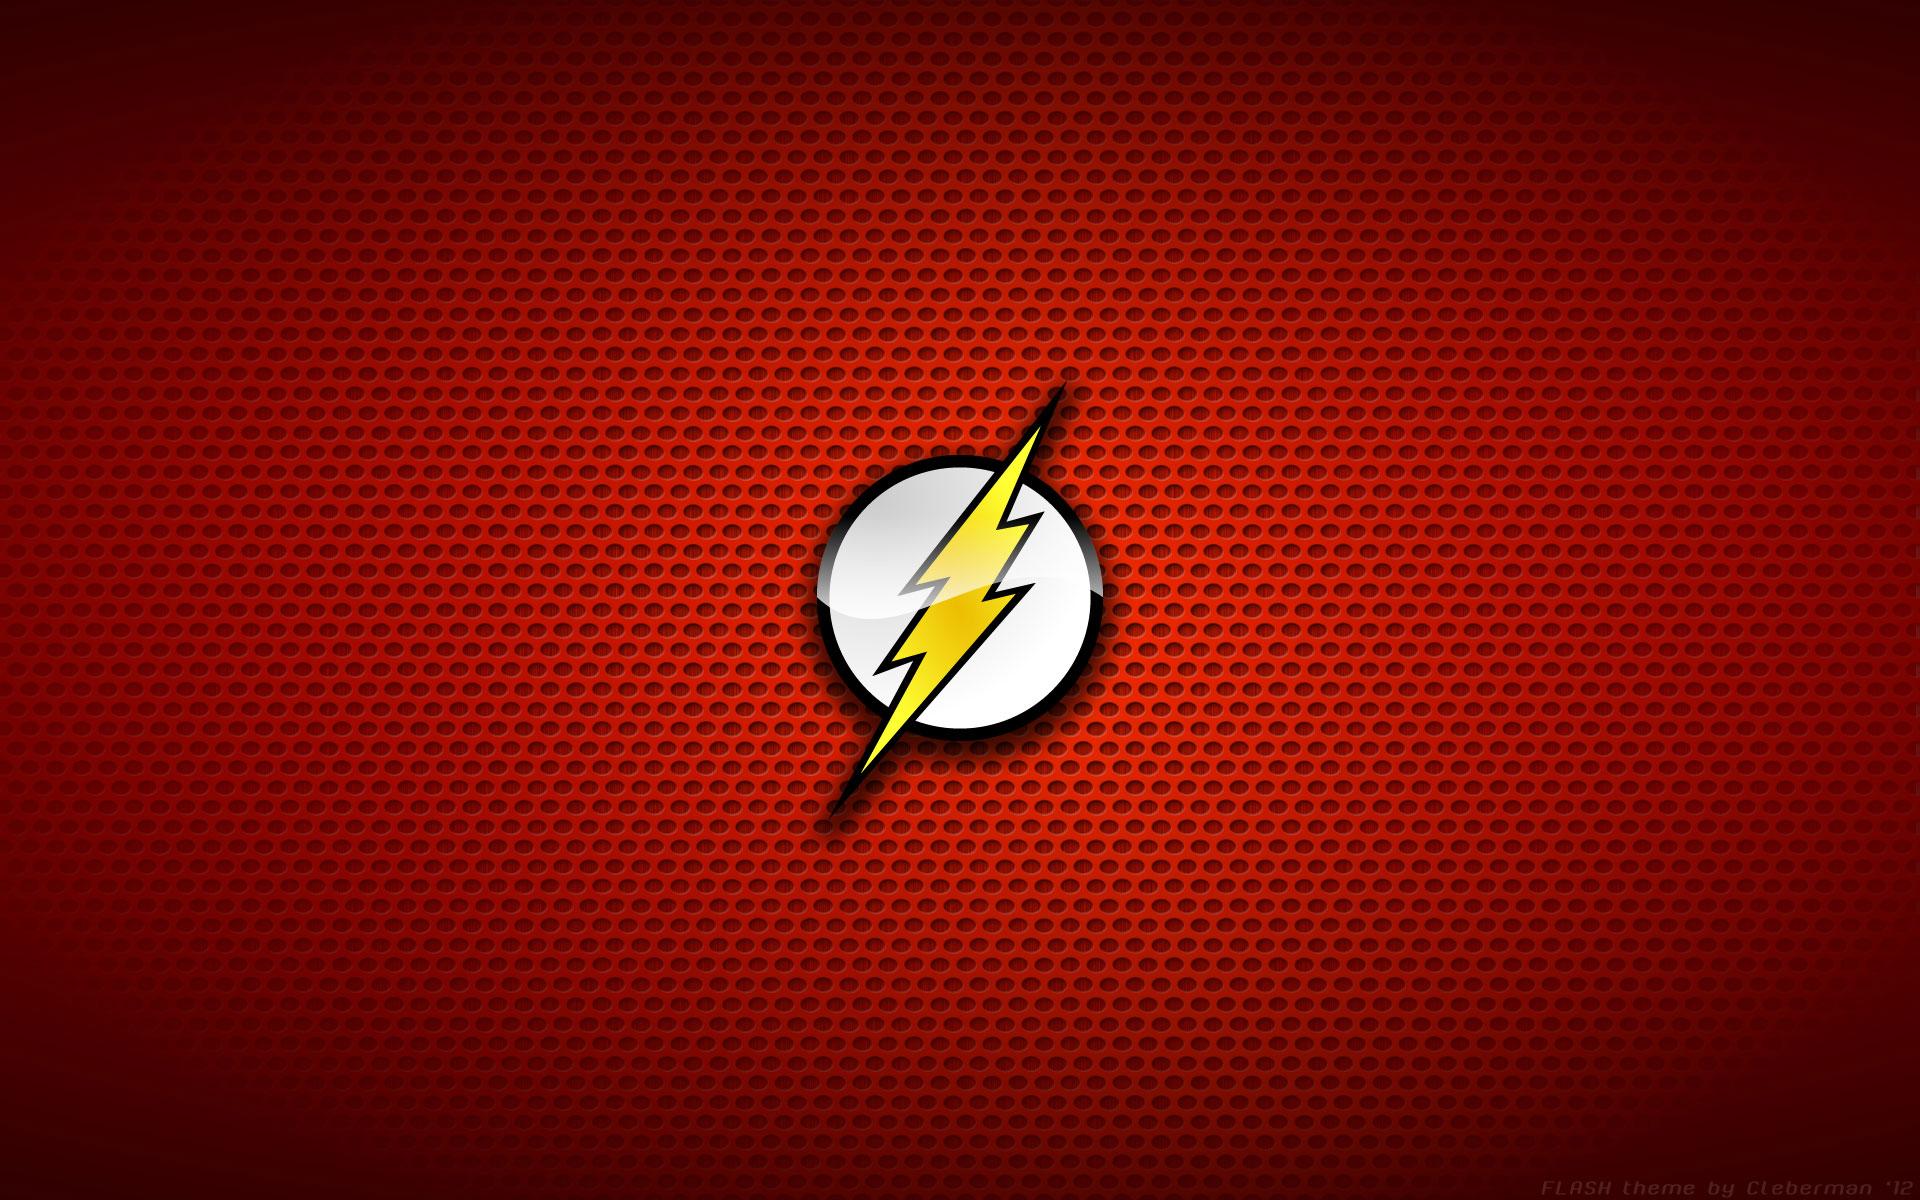 The Flash Wallpapers Archives - of 9 - WideWallpaper.info